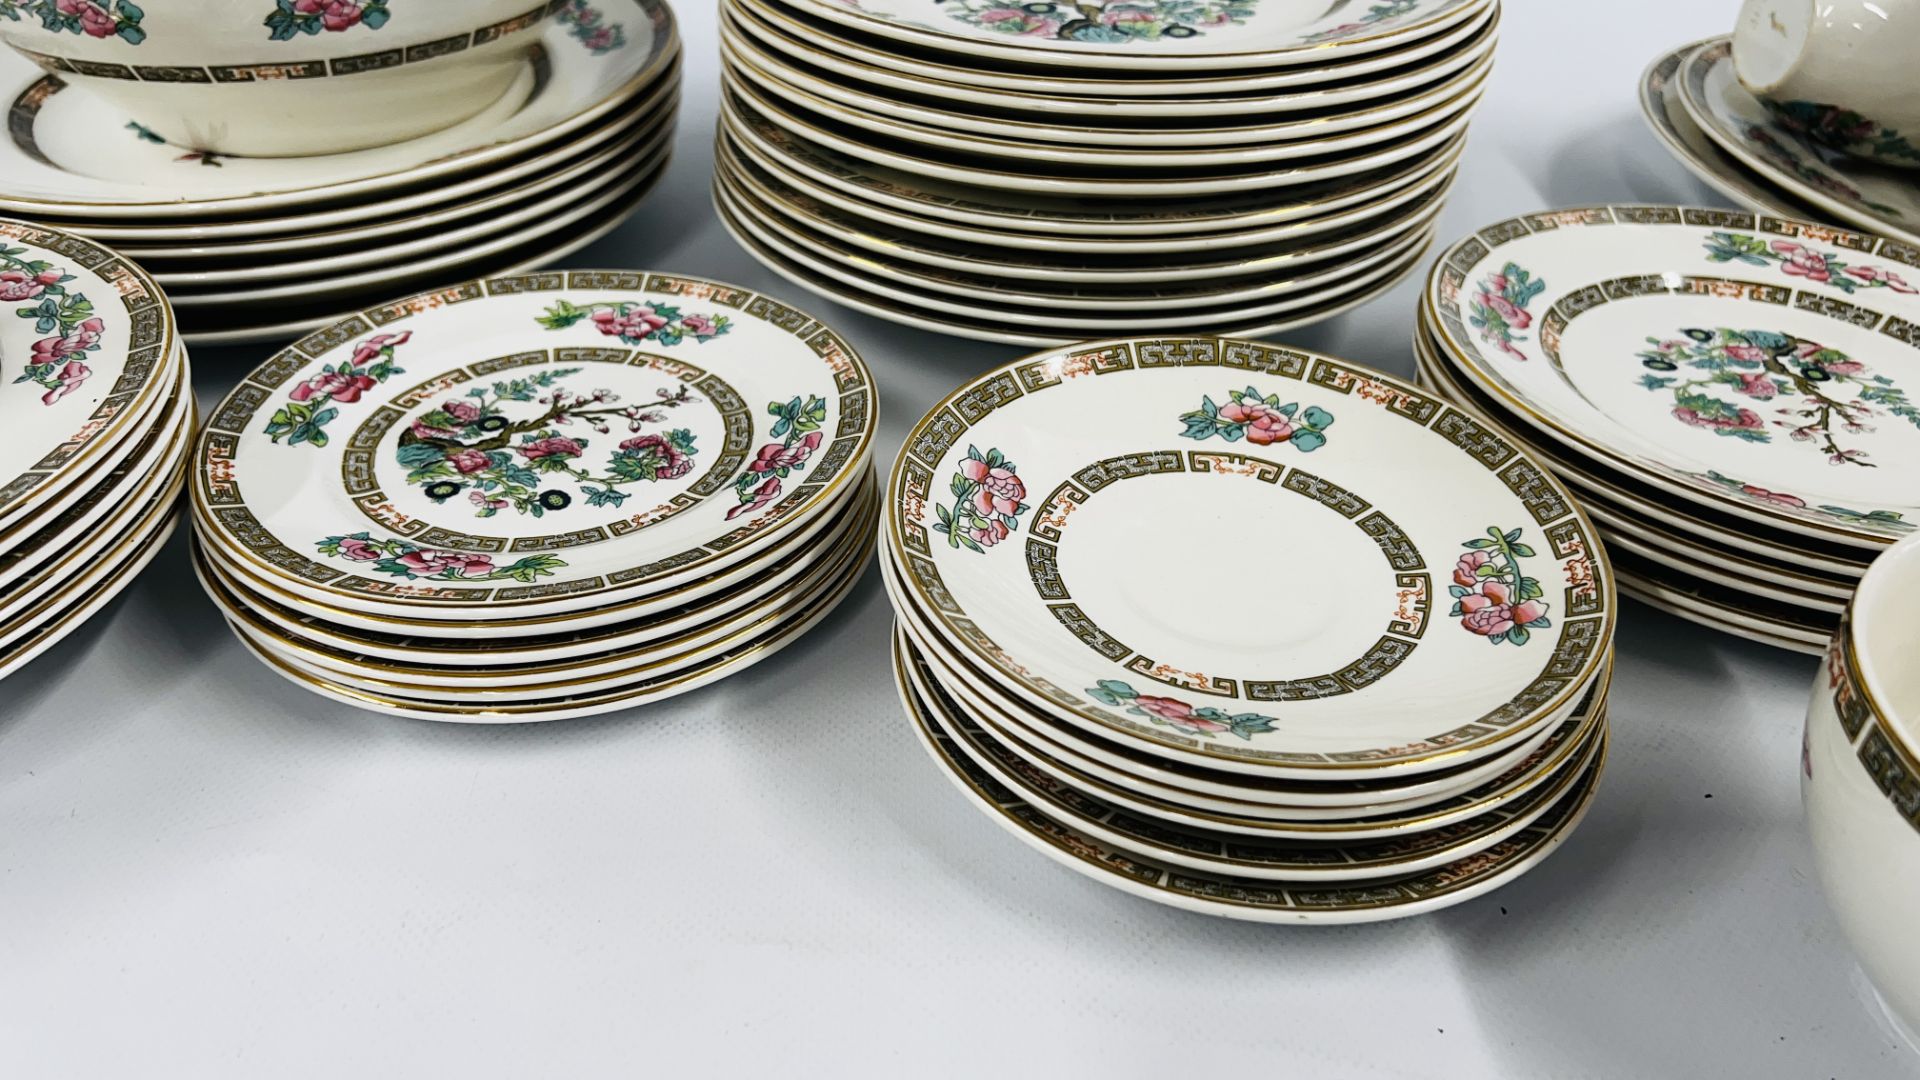 55 PIECES OF WEDGEWOOD INDIAN TREE DINNERWARE INCLUDING PLATES, CUPS, SAUCERS, TUREENS ETC. - Image 6 of 10